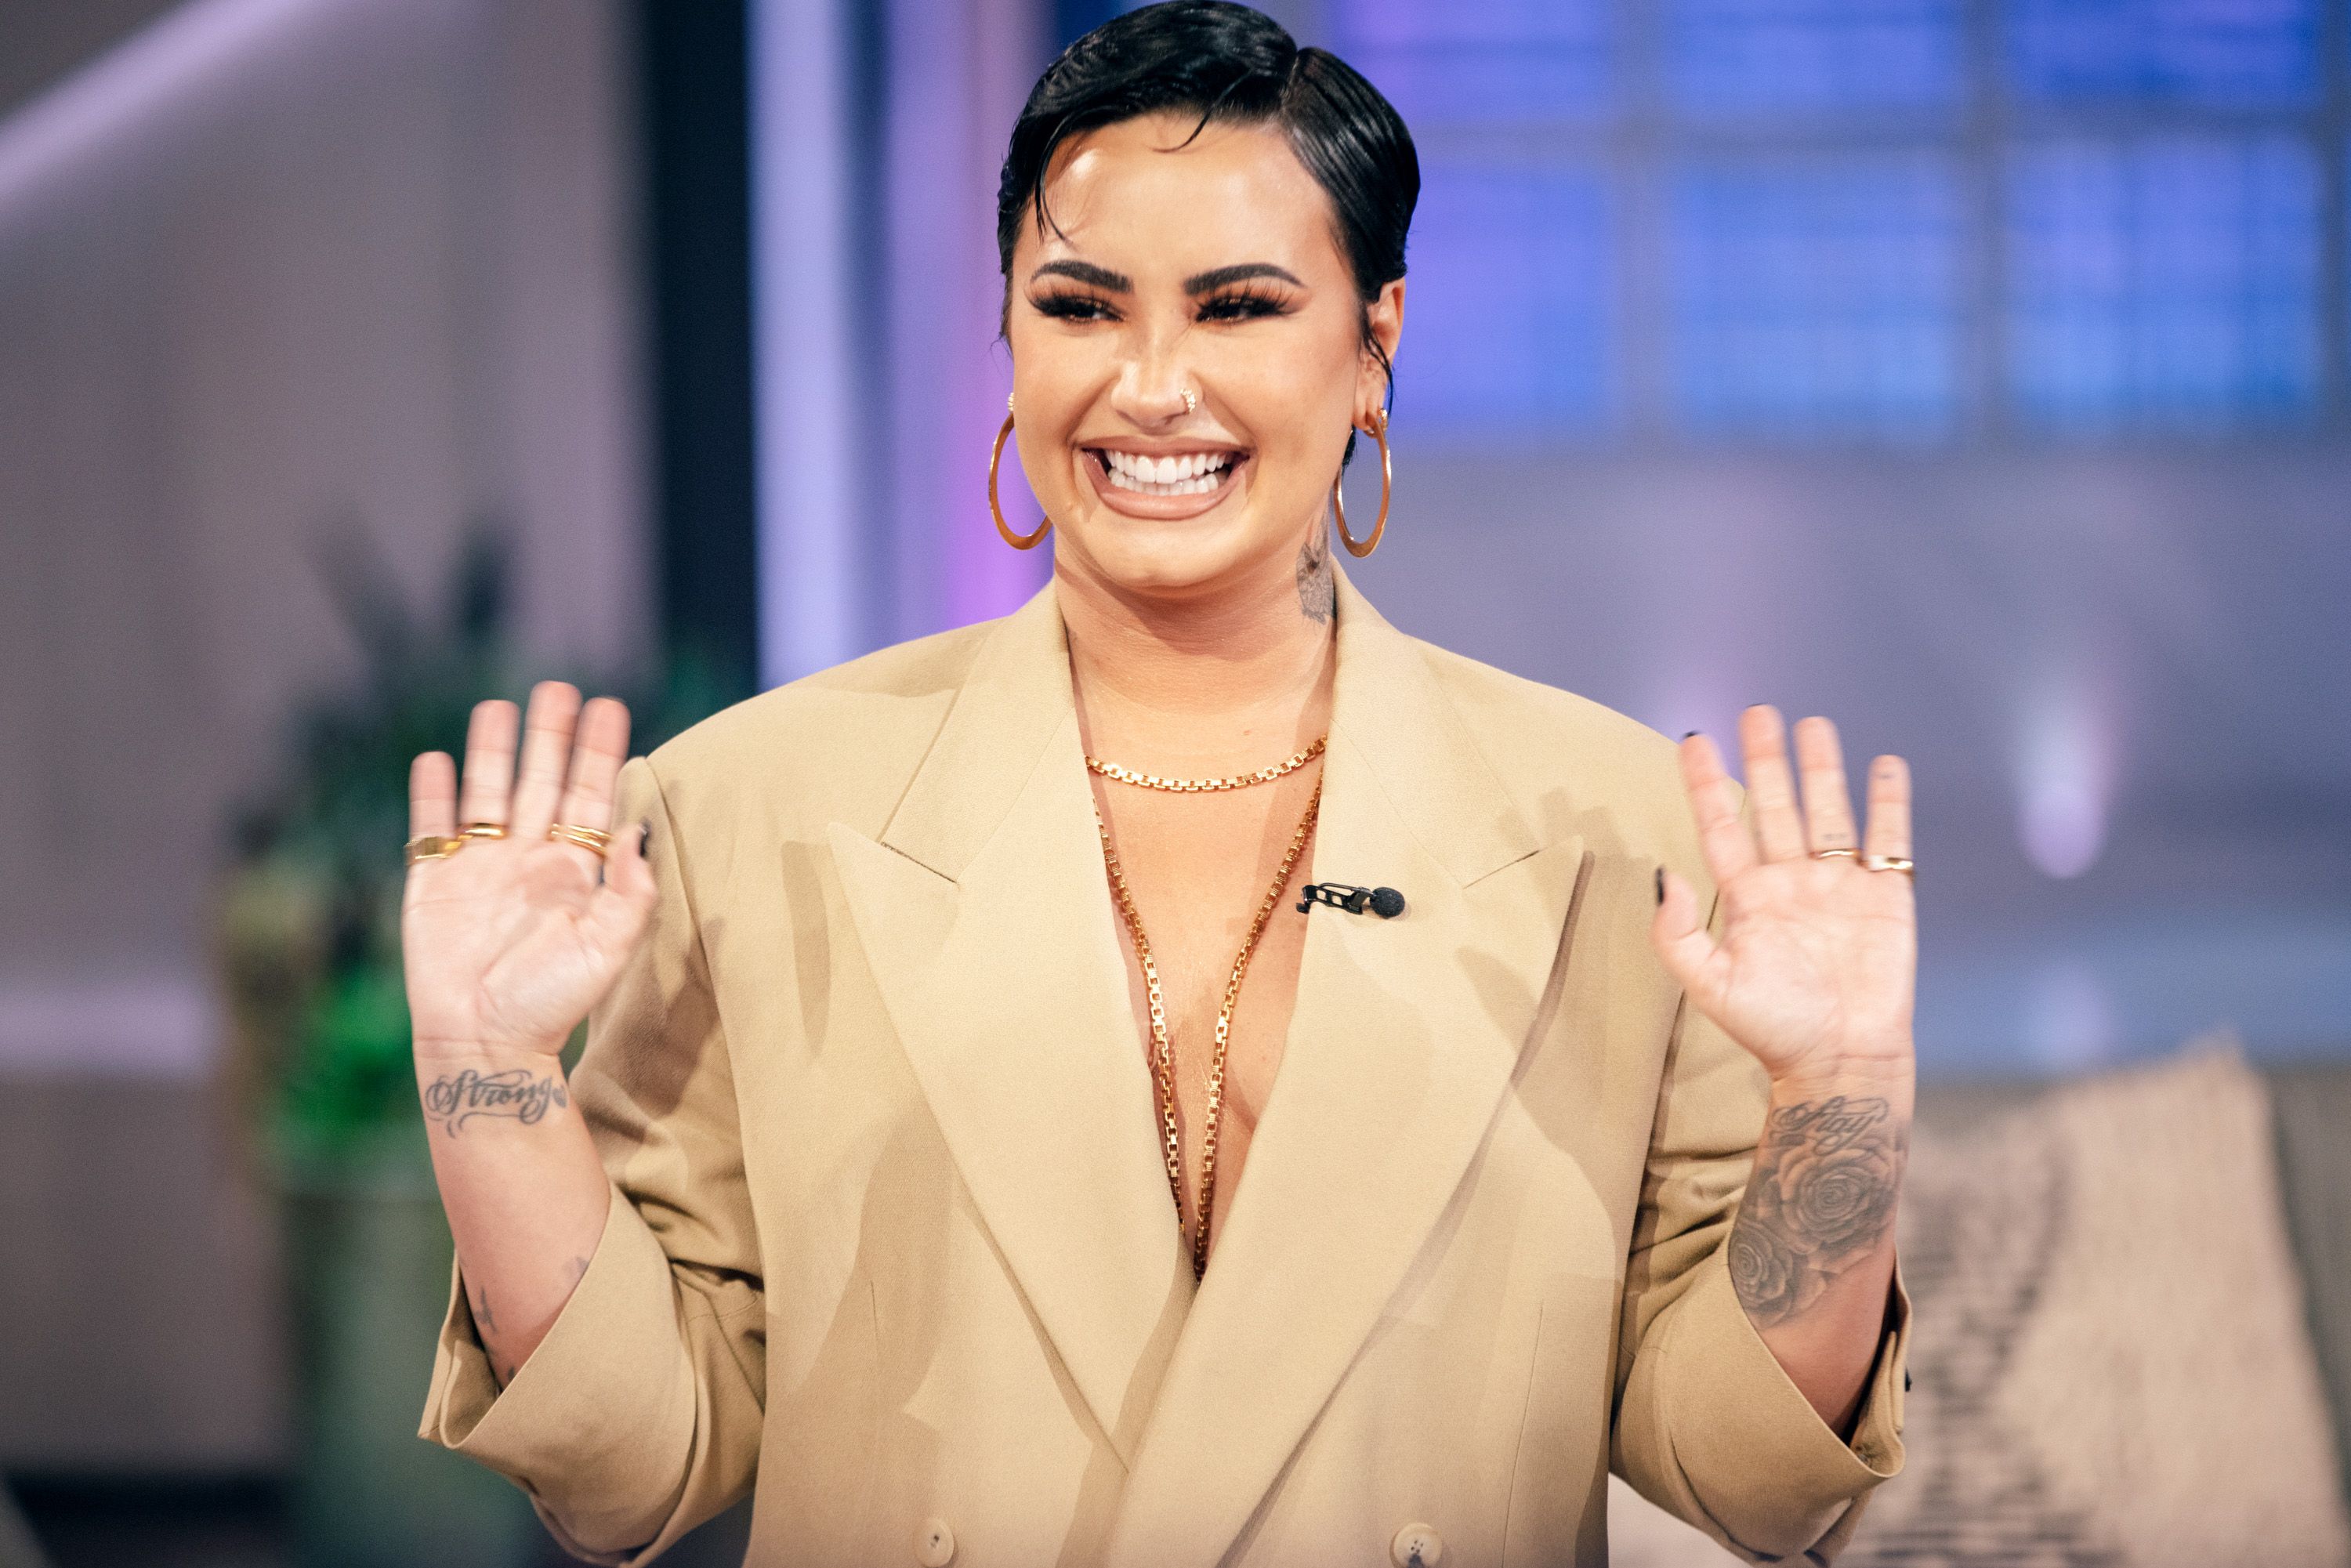 Demi Lovato Has Over 20 Tattoos—Here's a Look at What They All Mean